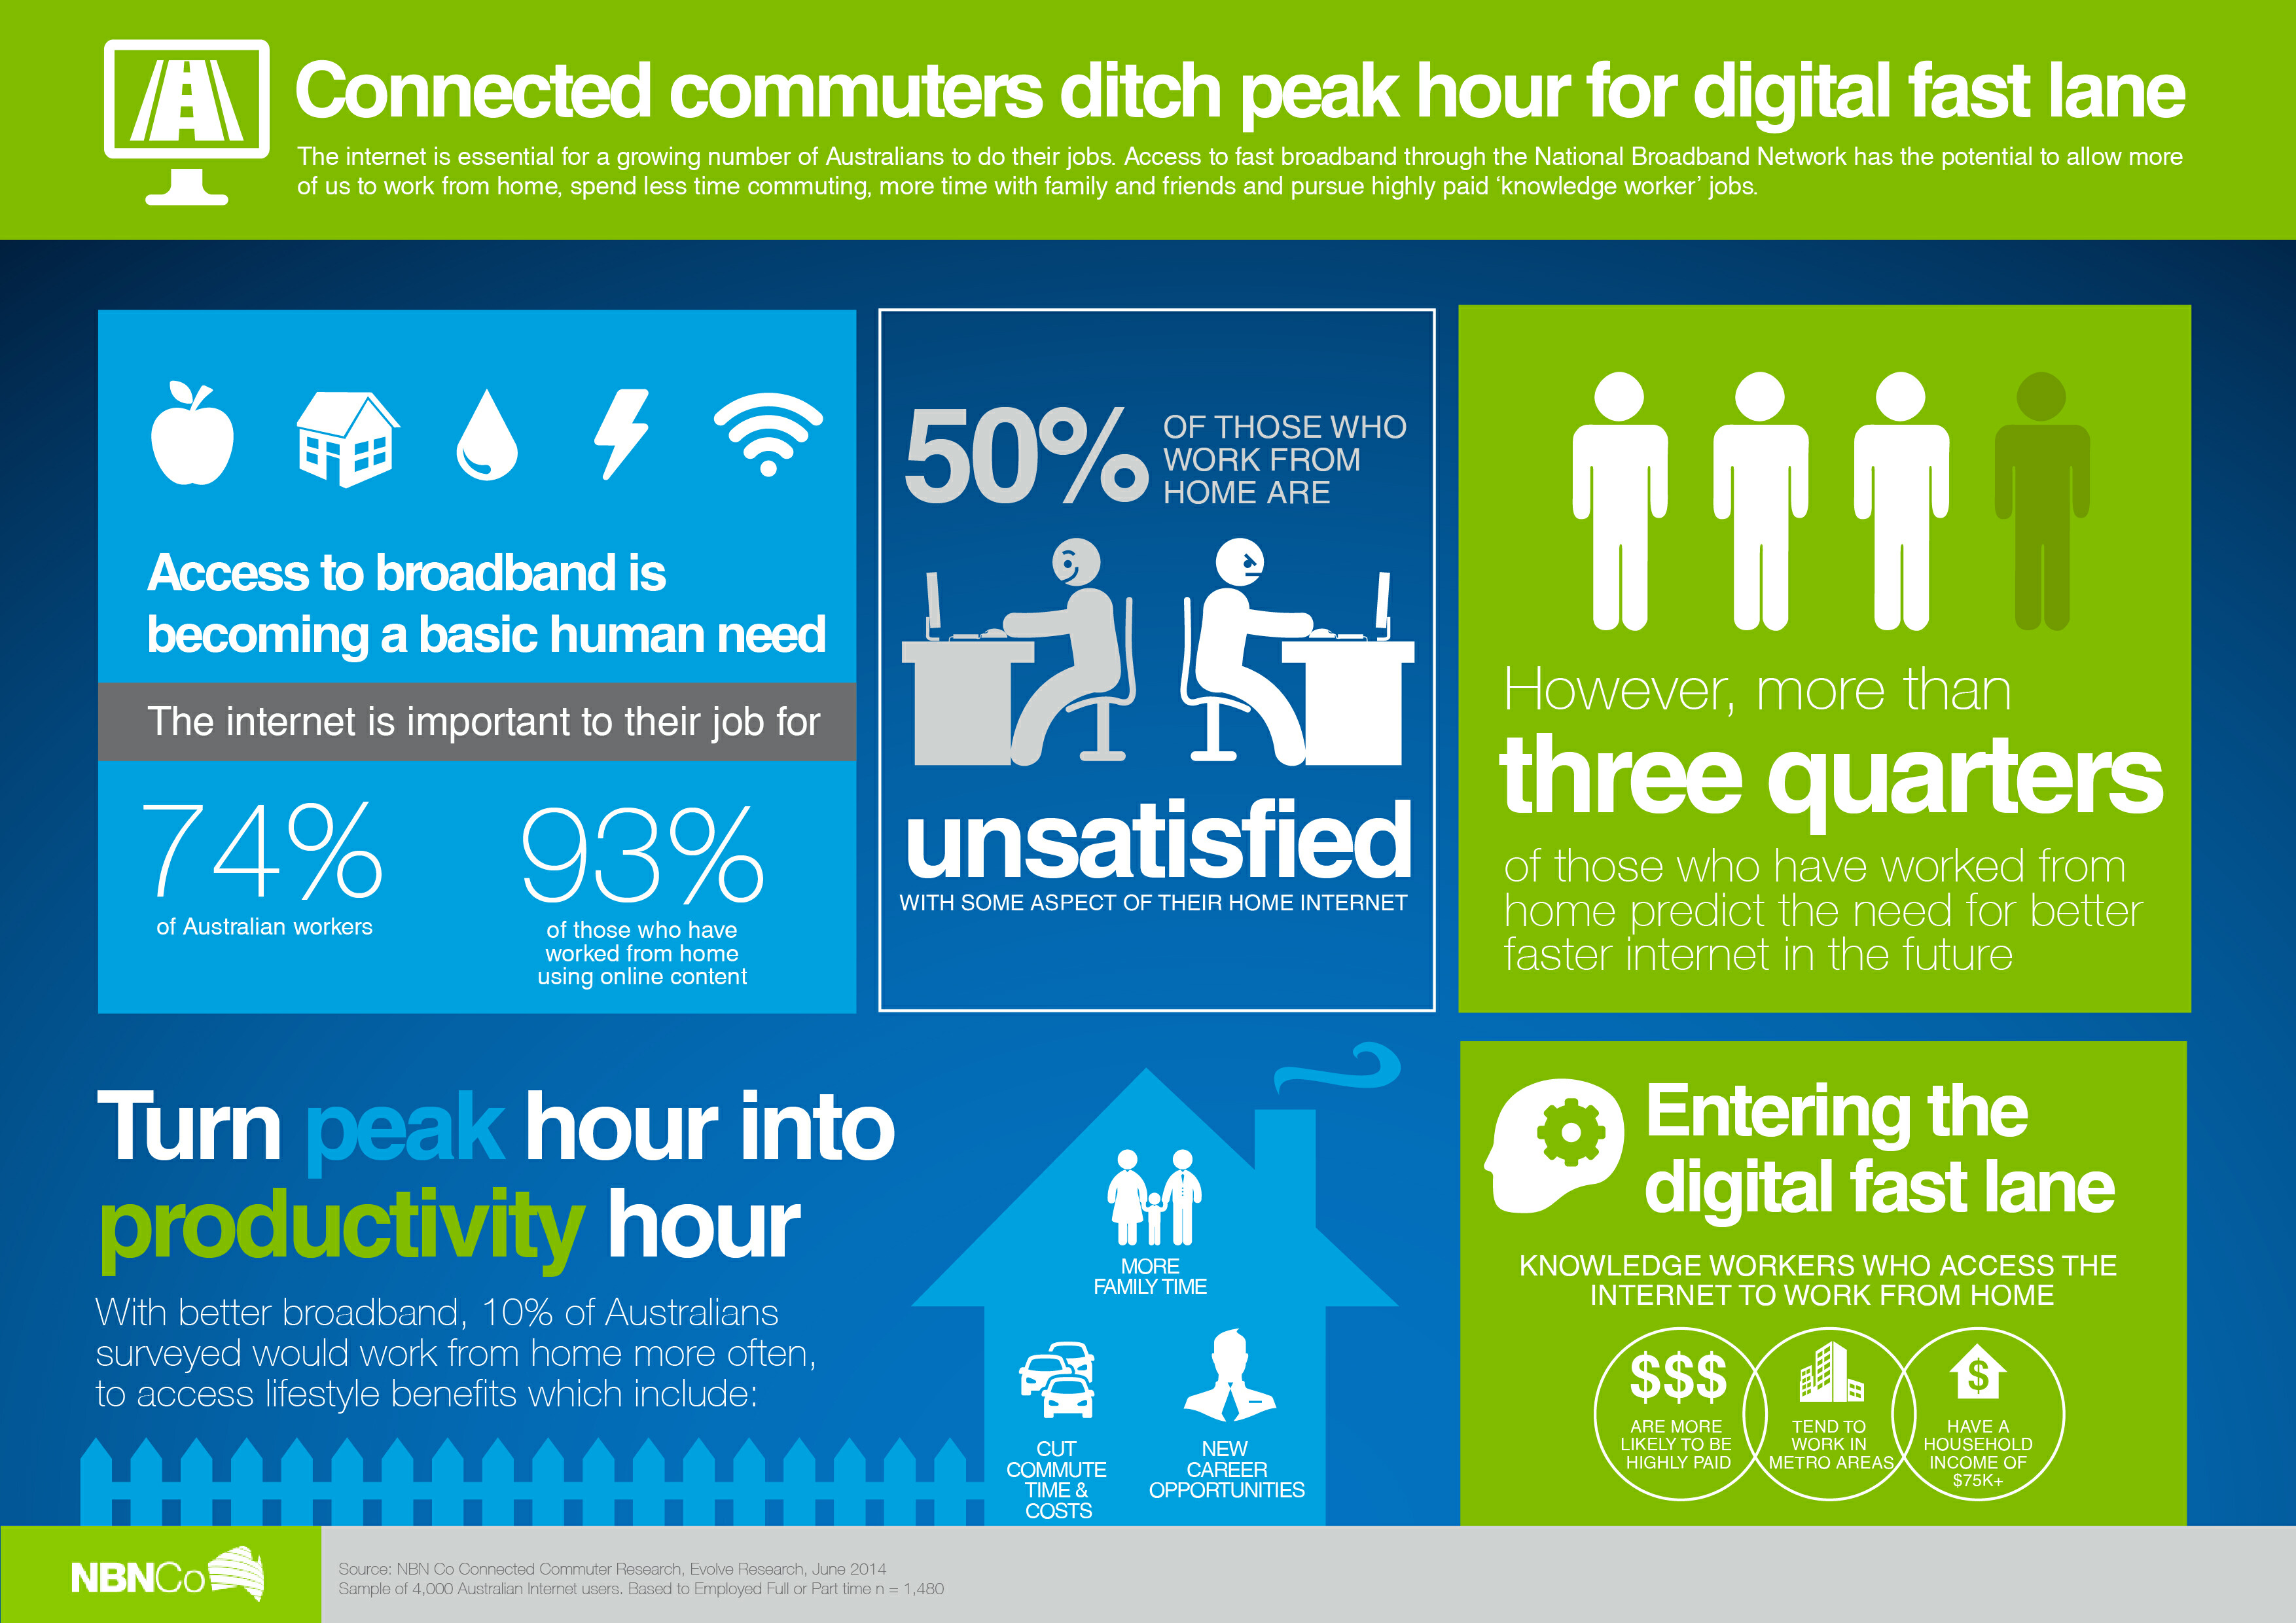 Queensland’s connected commuters ditch peak hour for digital fast lane